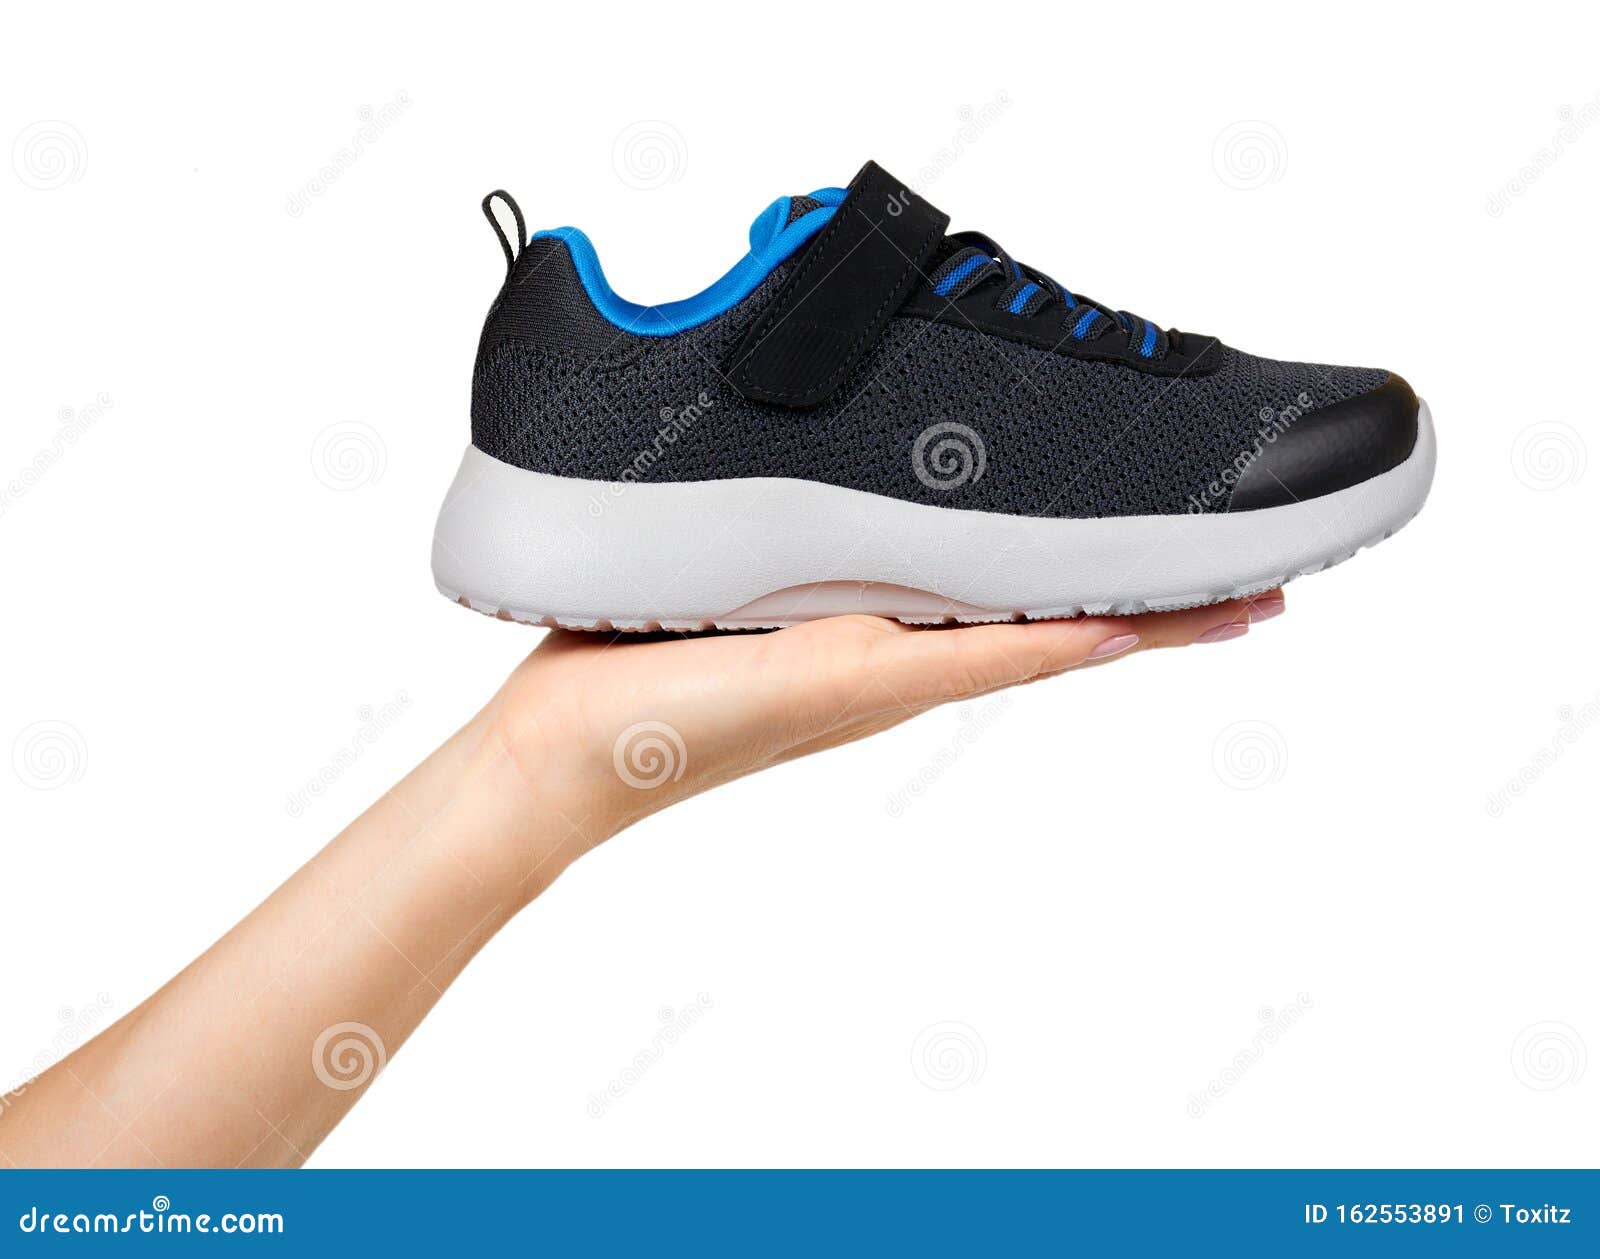 Dark Sport Shoes for Running. Kids Foot Wear Stock Image - Image of ...